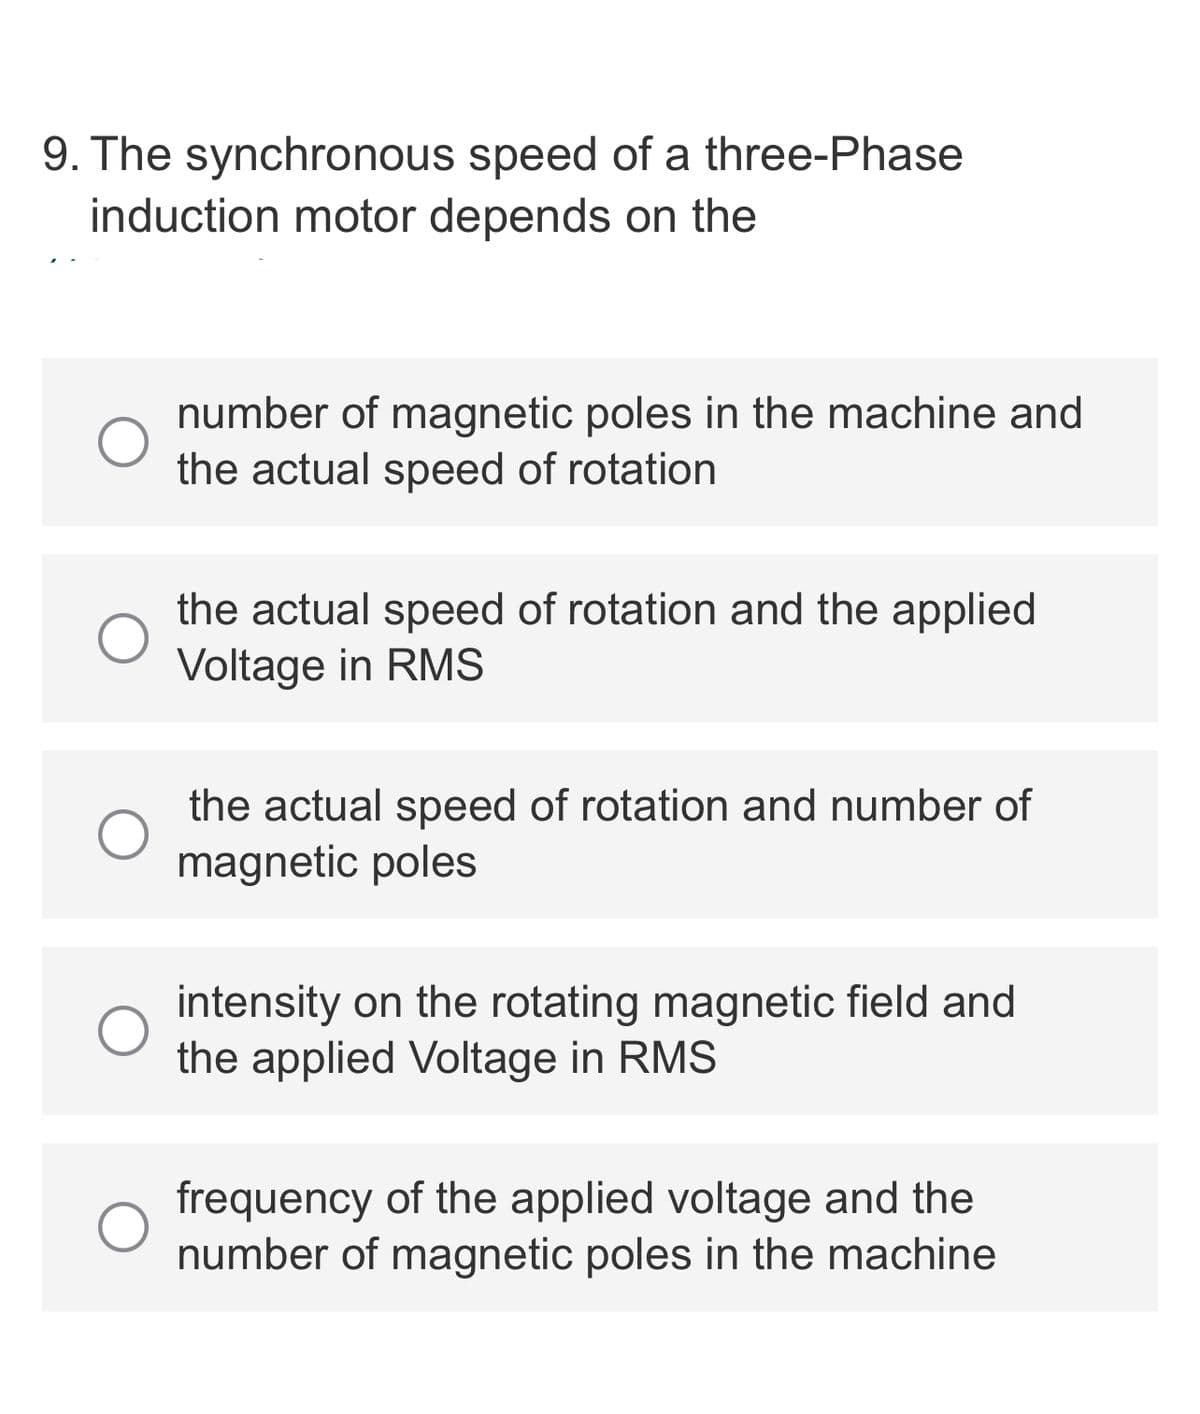 9. The synchronous speed of a three-Phase
induction motor depends on the
number of magnetic poles in the machine and
the actual speed of rotation
the actual speed of rotation and the applied
Voltage in RMS
the actual speed of rotation and number of
magnetic poles
intensity on the rotating magnetic field and
the applied Voltage in RMS
frequency of the applied voltage and the
number of magnetic poles in the machine
